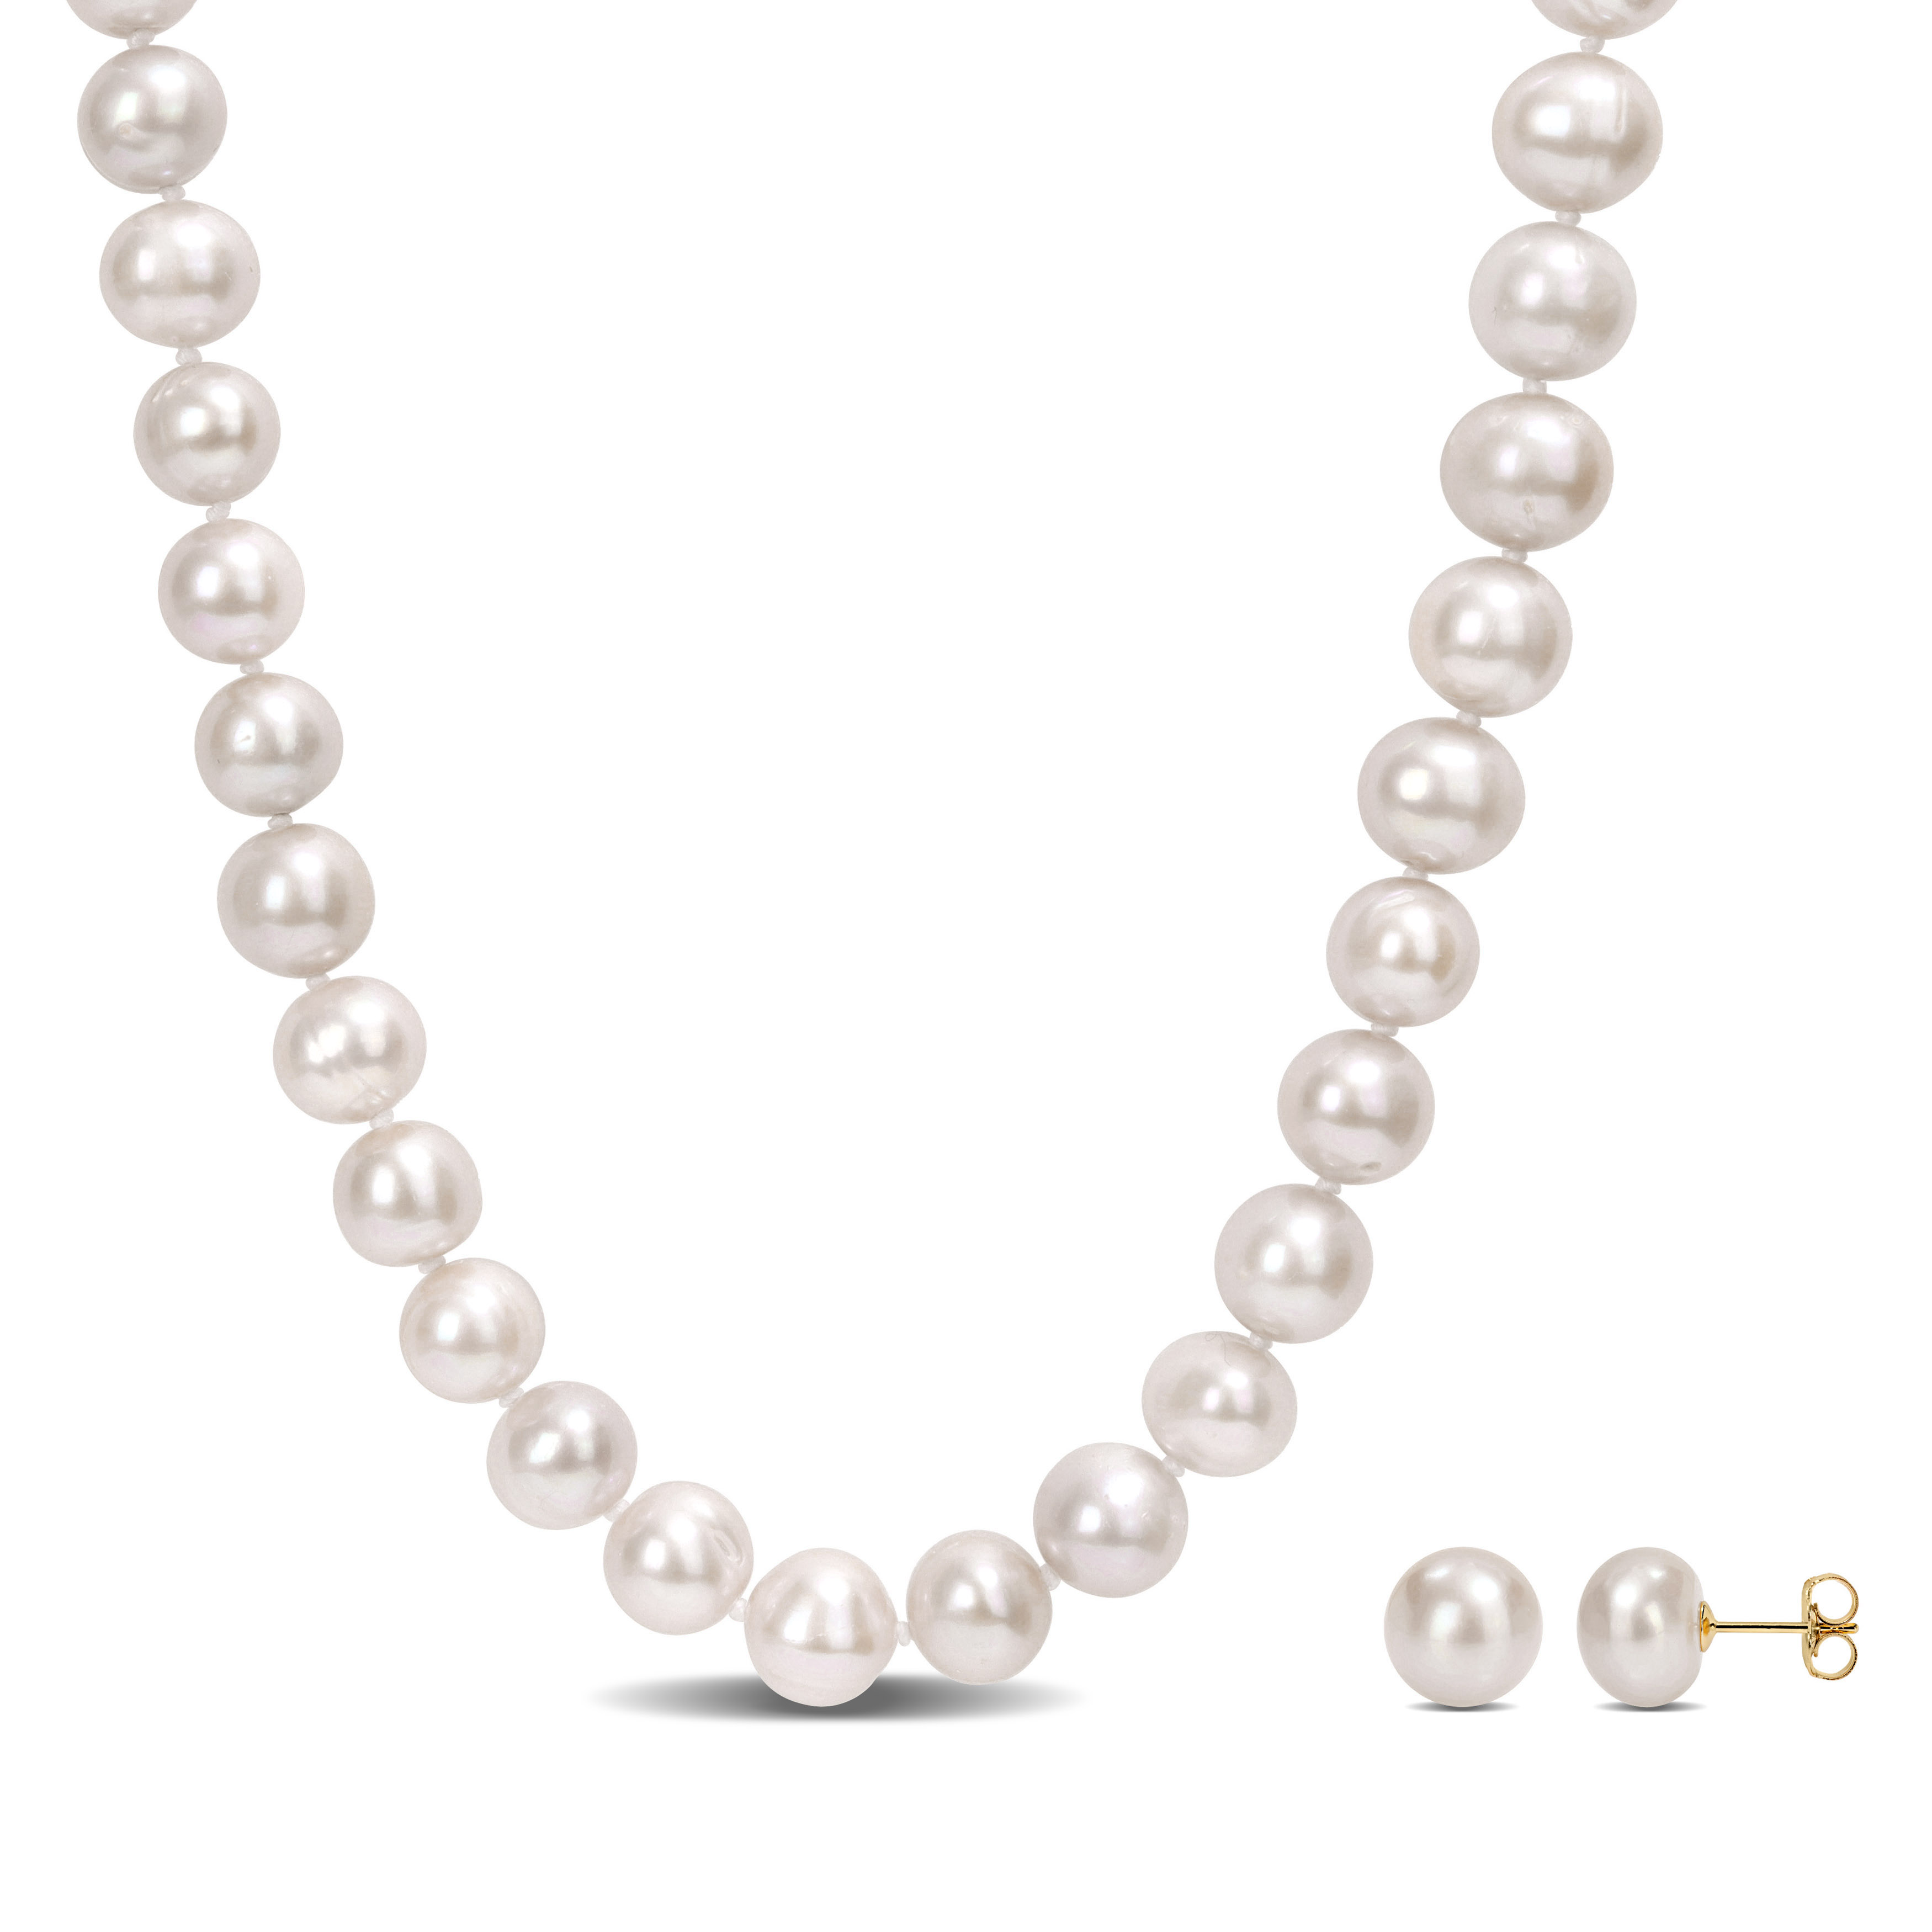 9-10 MM Cultured Freshwater Pearl Strand Necklace and Stud Earrings 2-Piece Set in 14k Yellow Gold